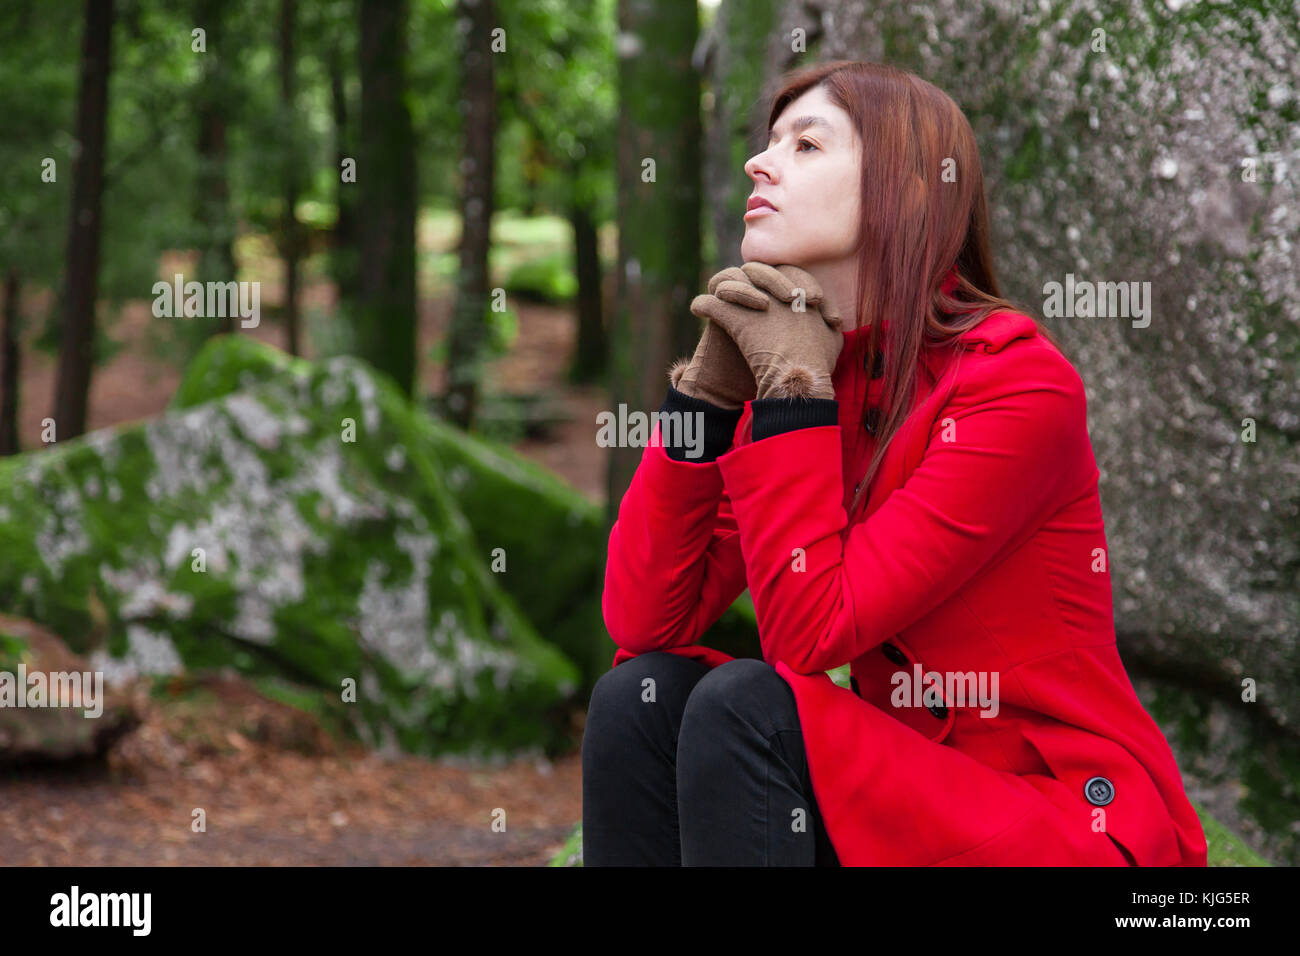 Depressed and sad young woman feeling depression sitting on forest, looking up with melancholic thinking, wearing a red long coat or overcoat during f Stock Photo